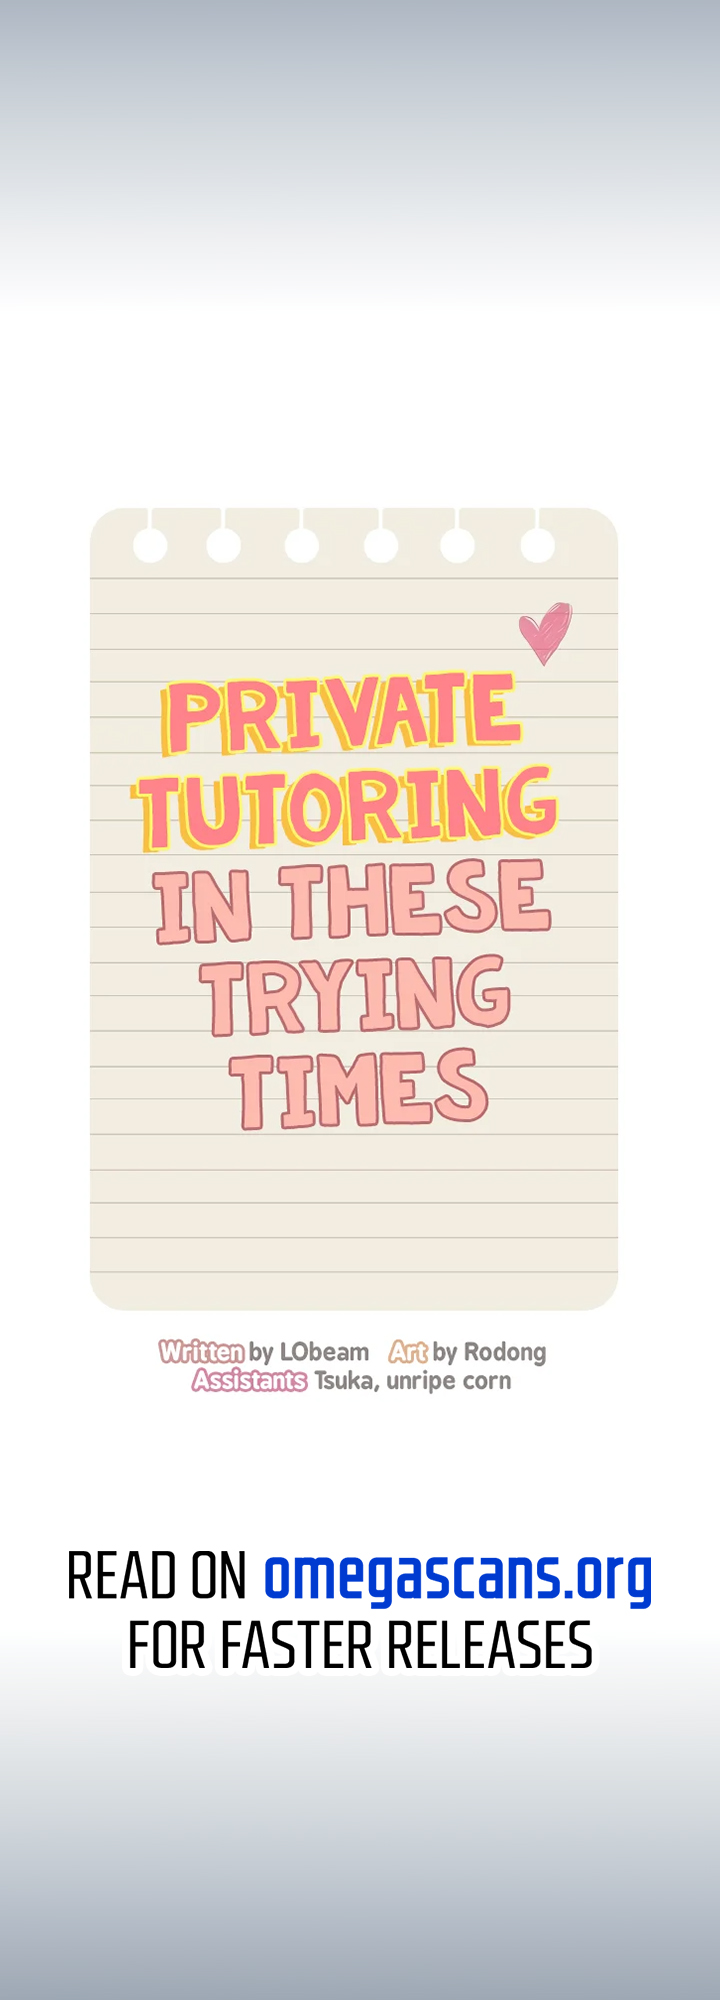 Private Tutoring in These Trying Times image